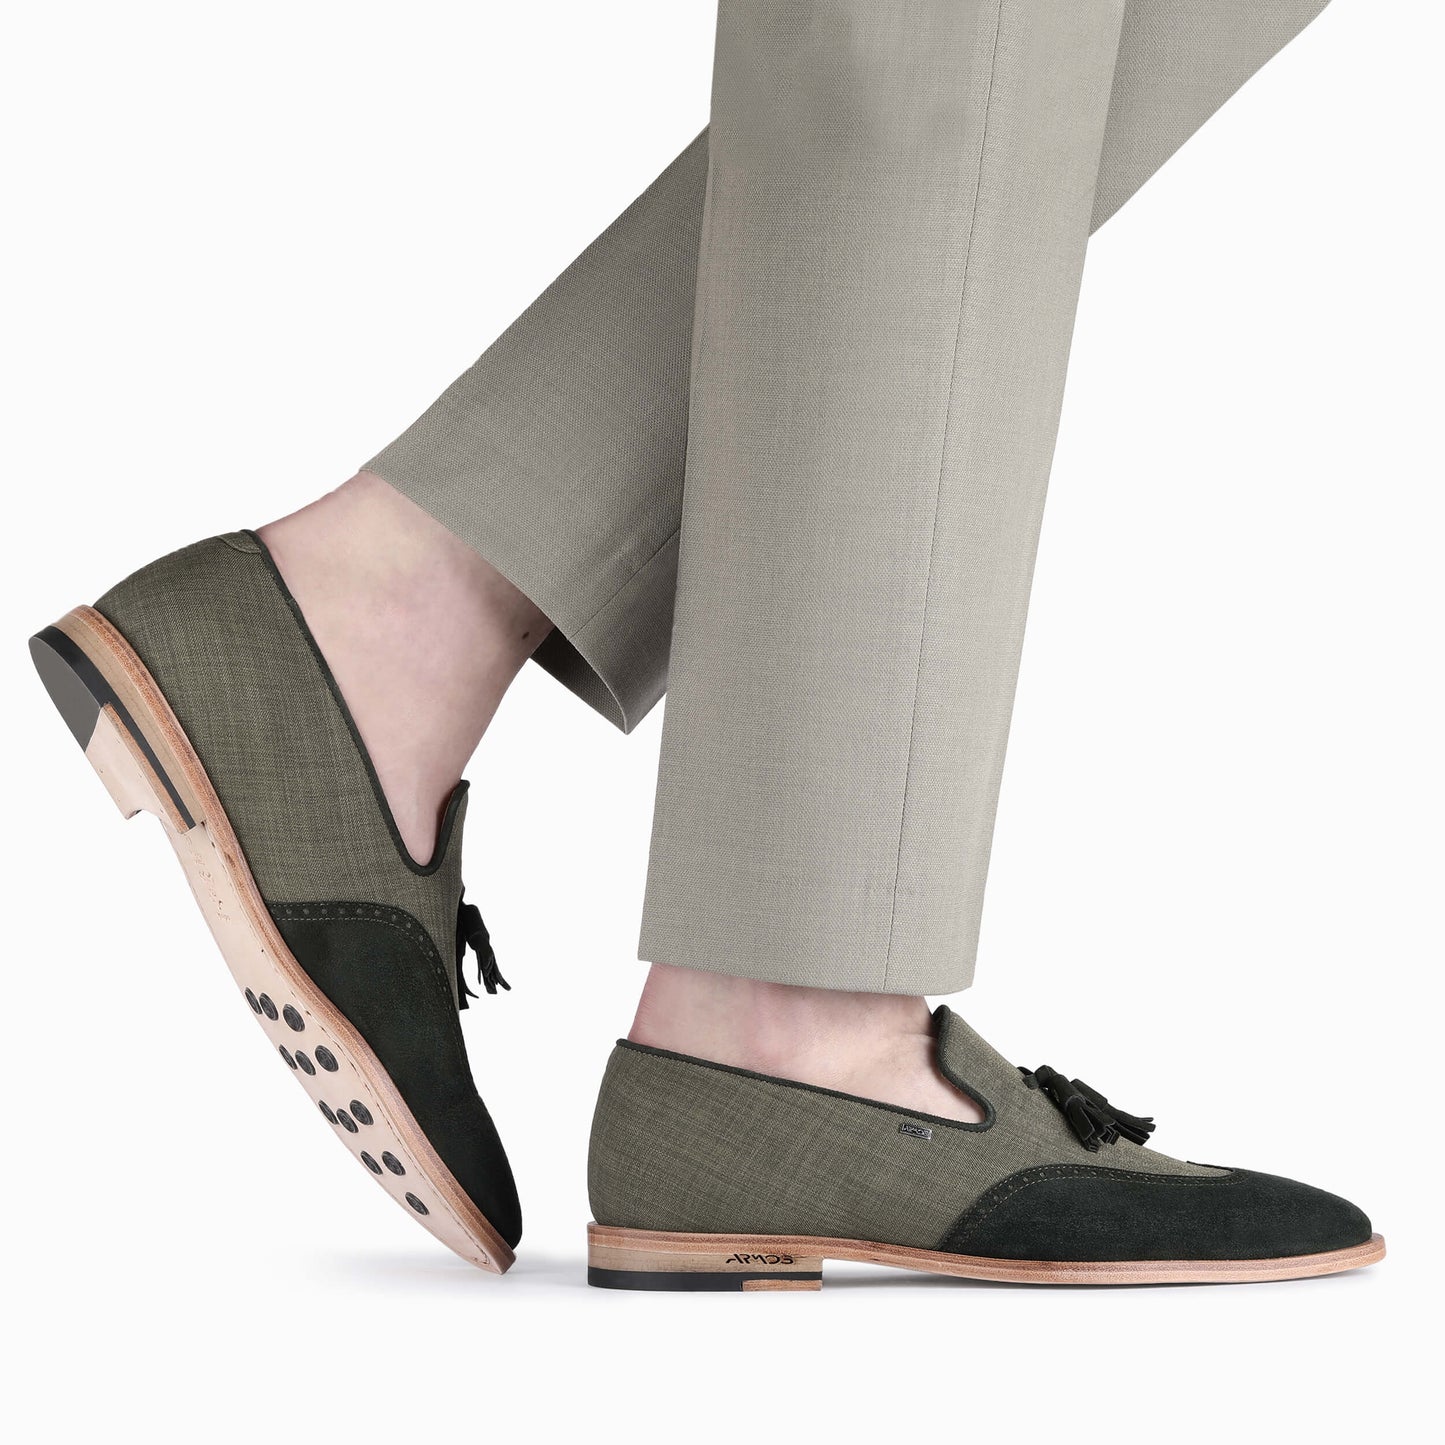 Loafers in shades of green